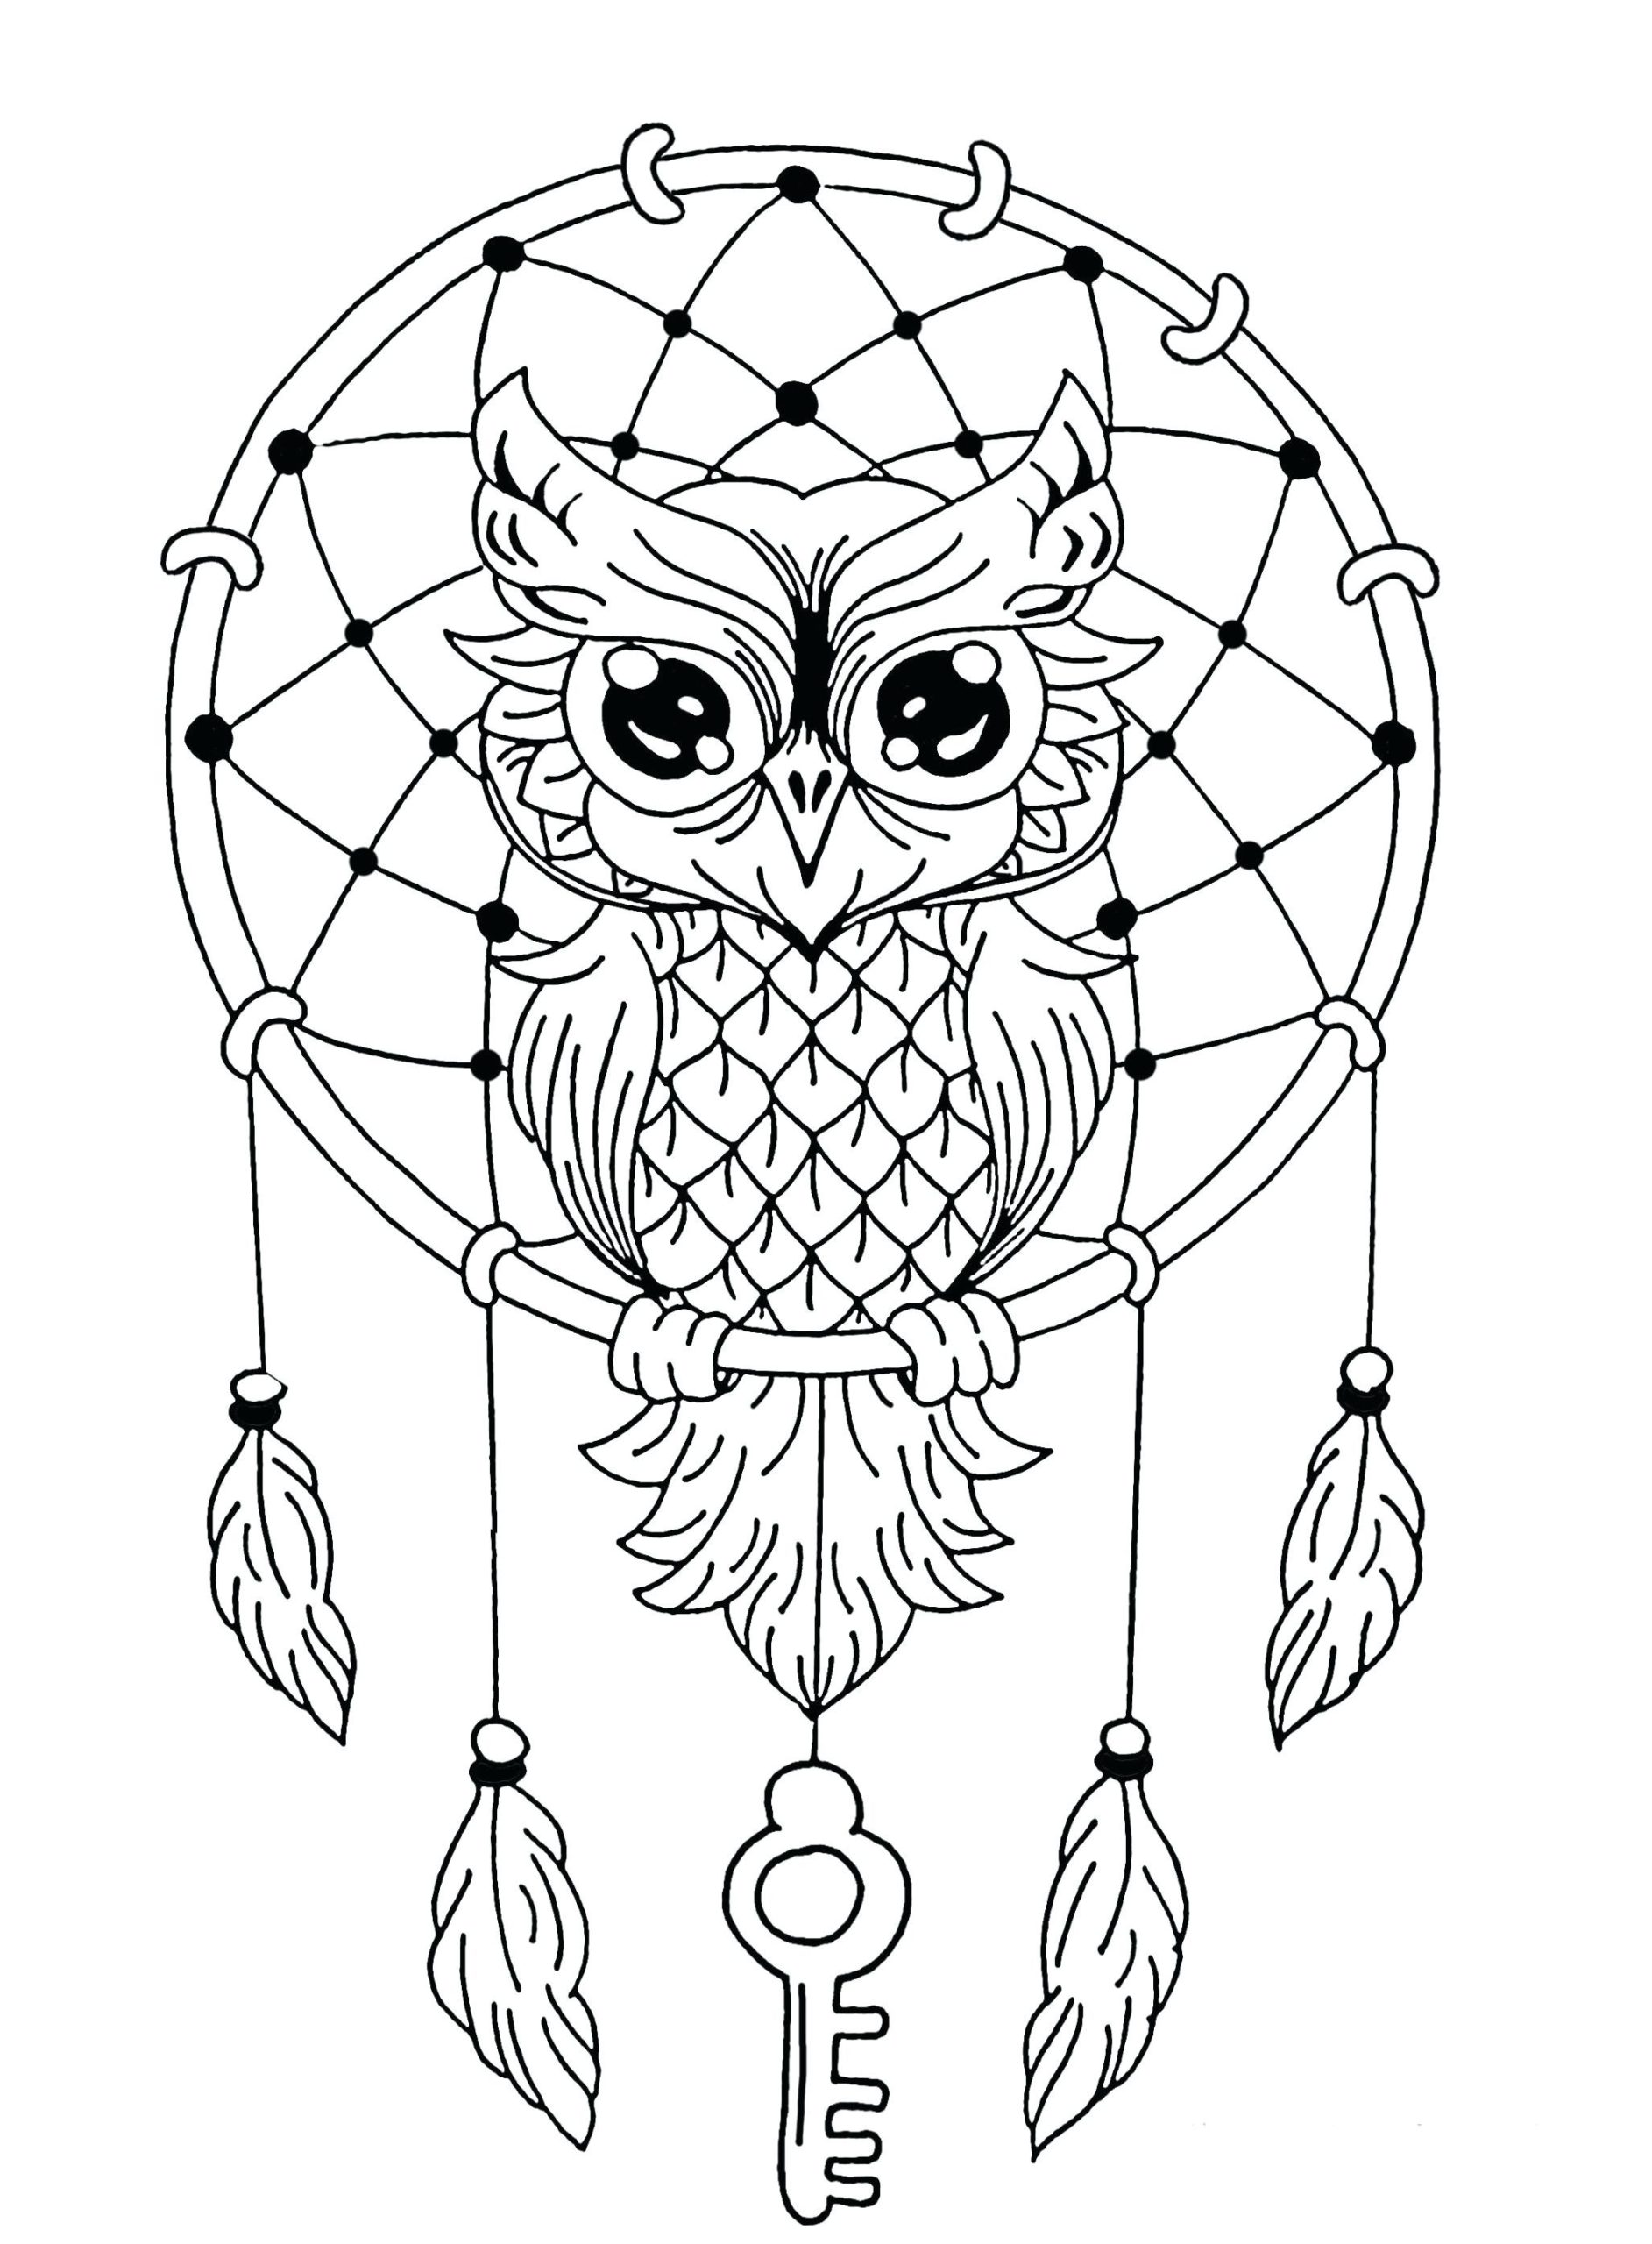 Download Coloring Pages Coloring Book Odd Easy Mandala Animal Simple For Coloring Home